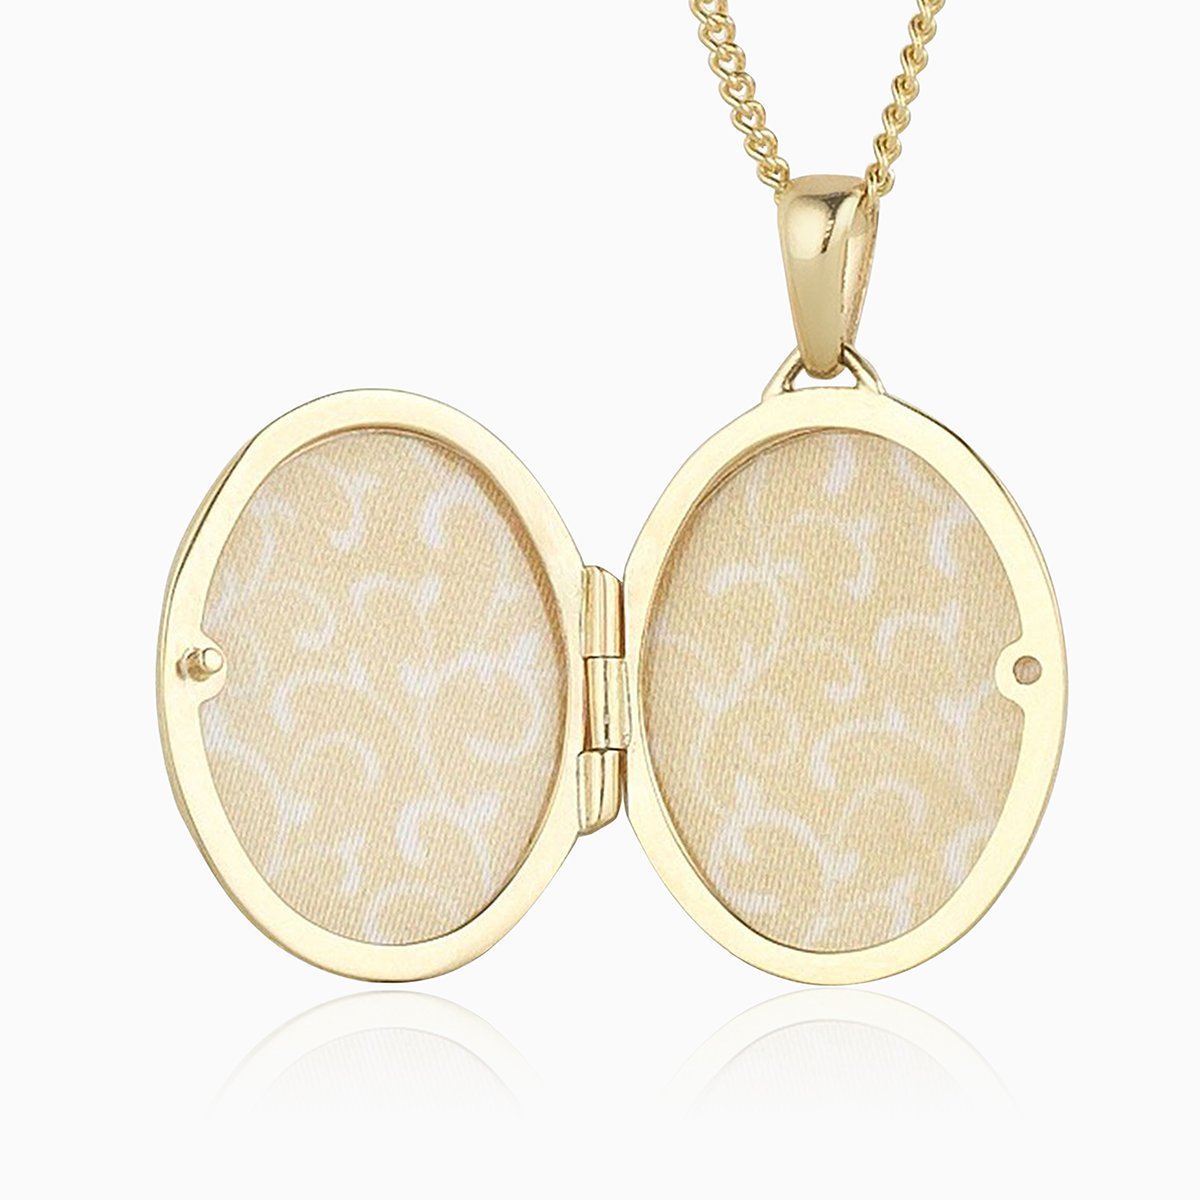 An open 9 ct gold polished oval locket on a 9 ct gold curb chain